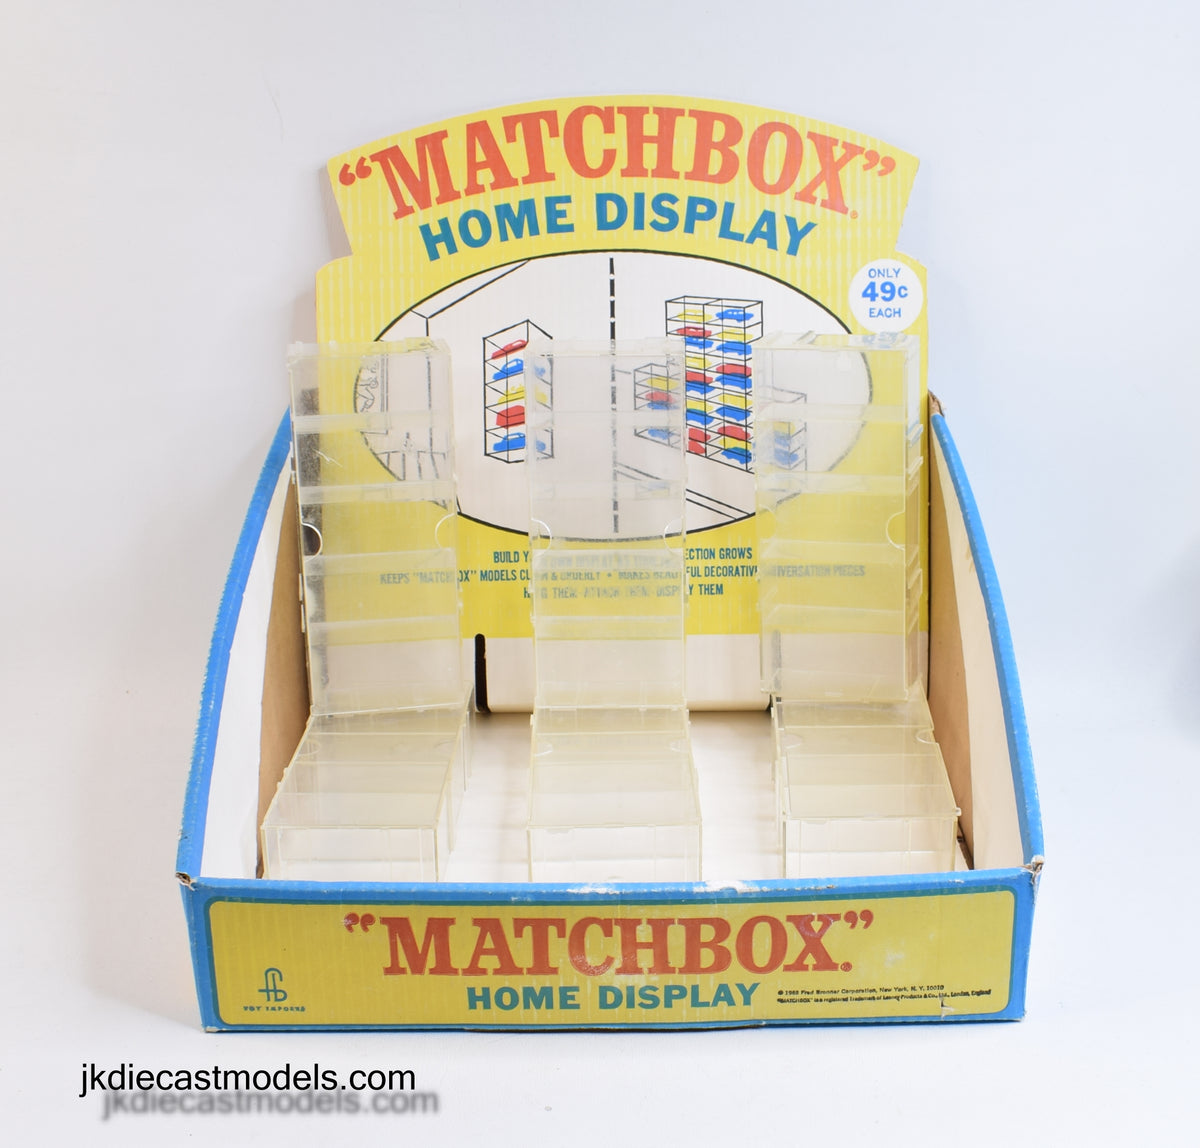 U.S - P.OS Matchbox Lesney Counter display for Wall mounted home display units 'Blue & Yellow' Collection